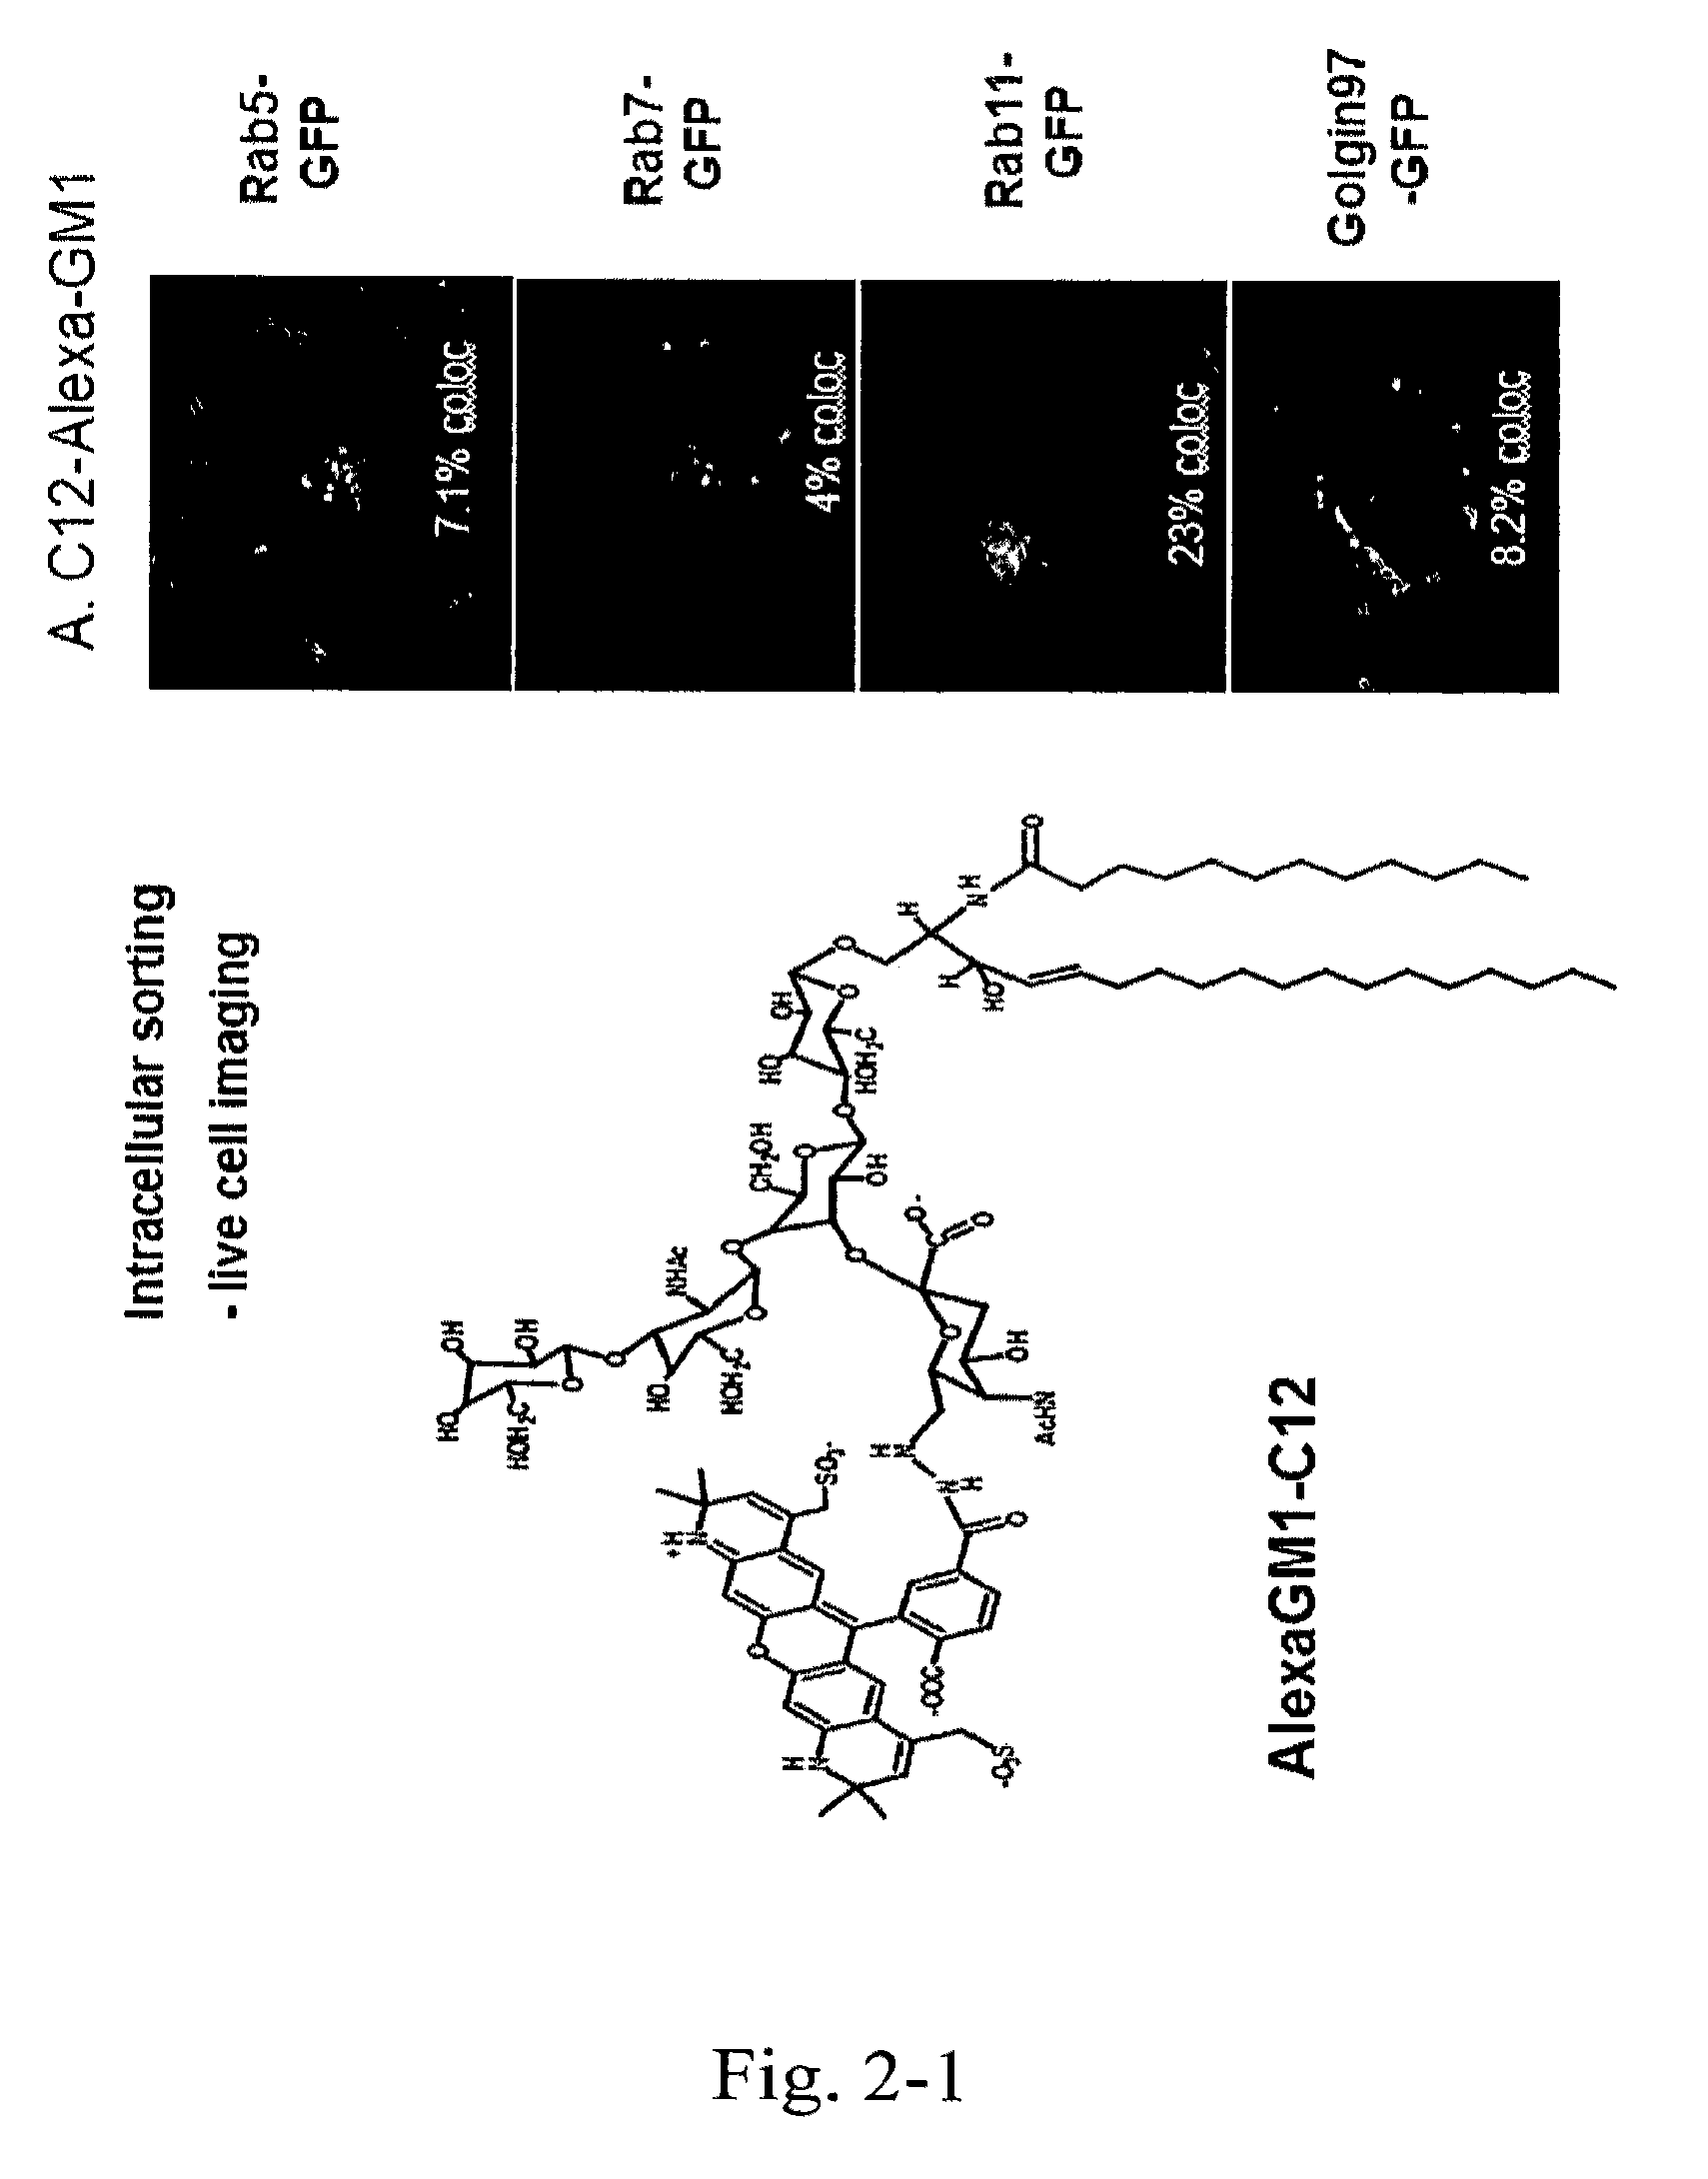 Mucosal delivery of therapeutic molecules, proteins, or particles coupled to ceramide lipids